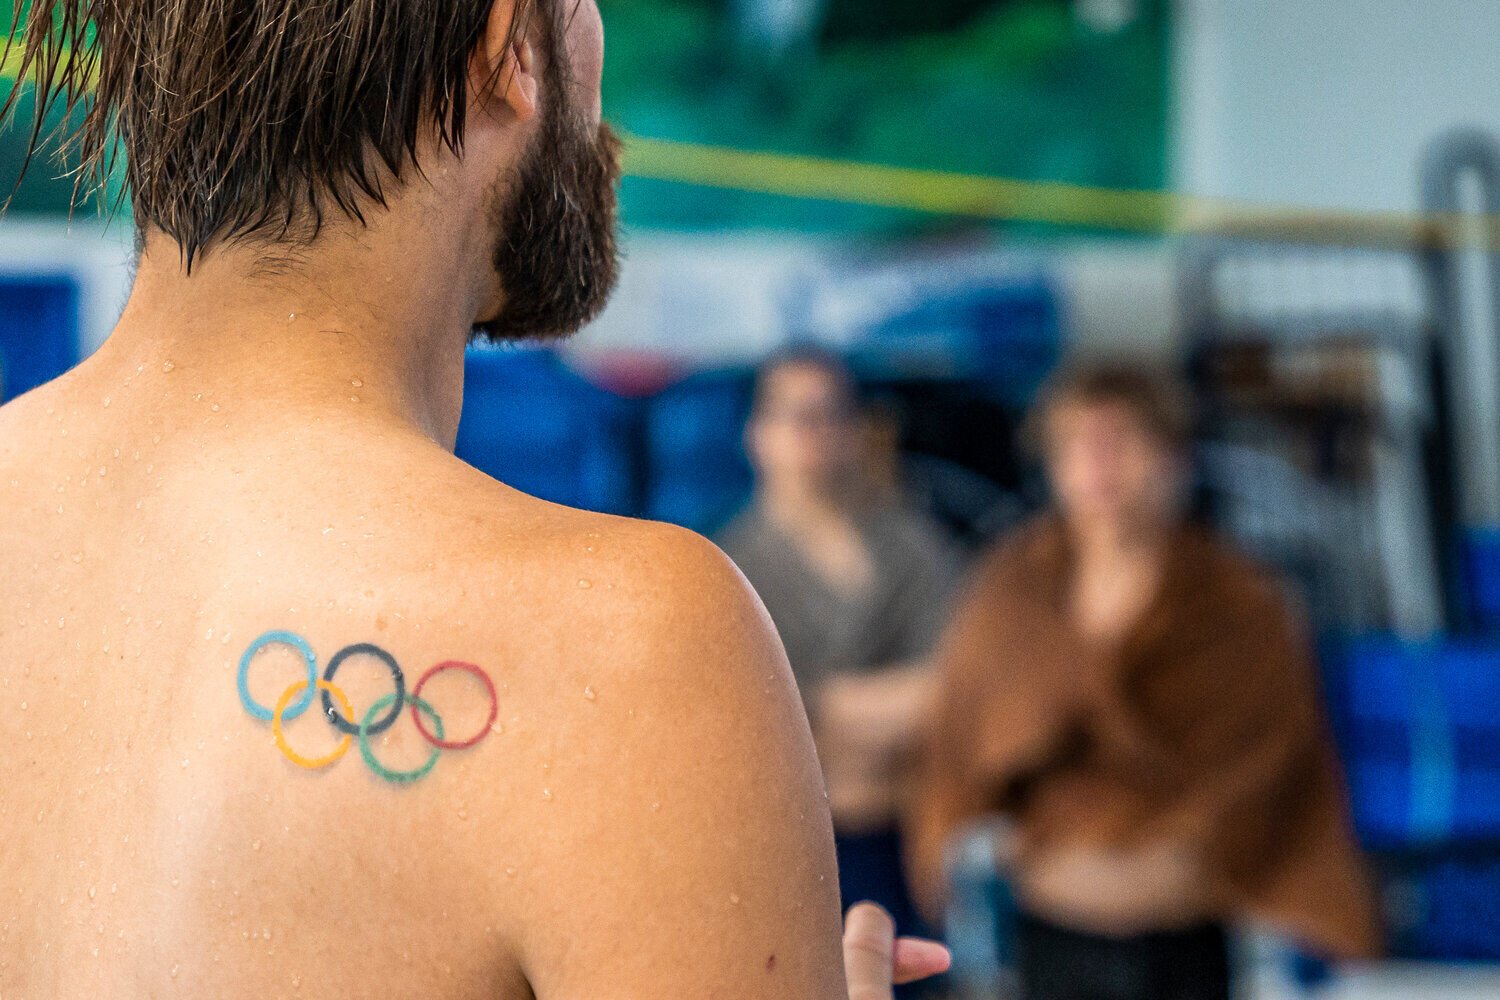 Fun Fact: After Robeisy Ramírez won his 2nd gold medal at the 2016 Olympics,  he got a tattoo of the Olympic logo on his bicep. Upon his return to Cuba  however, he